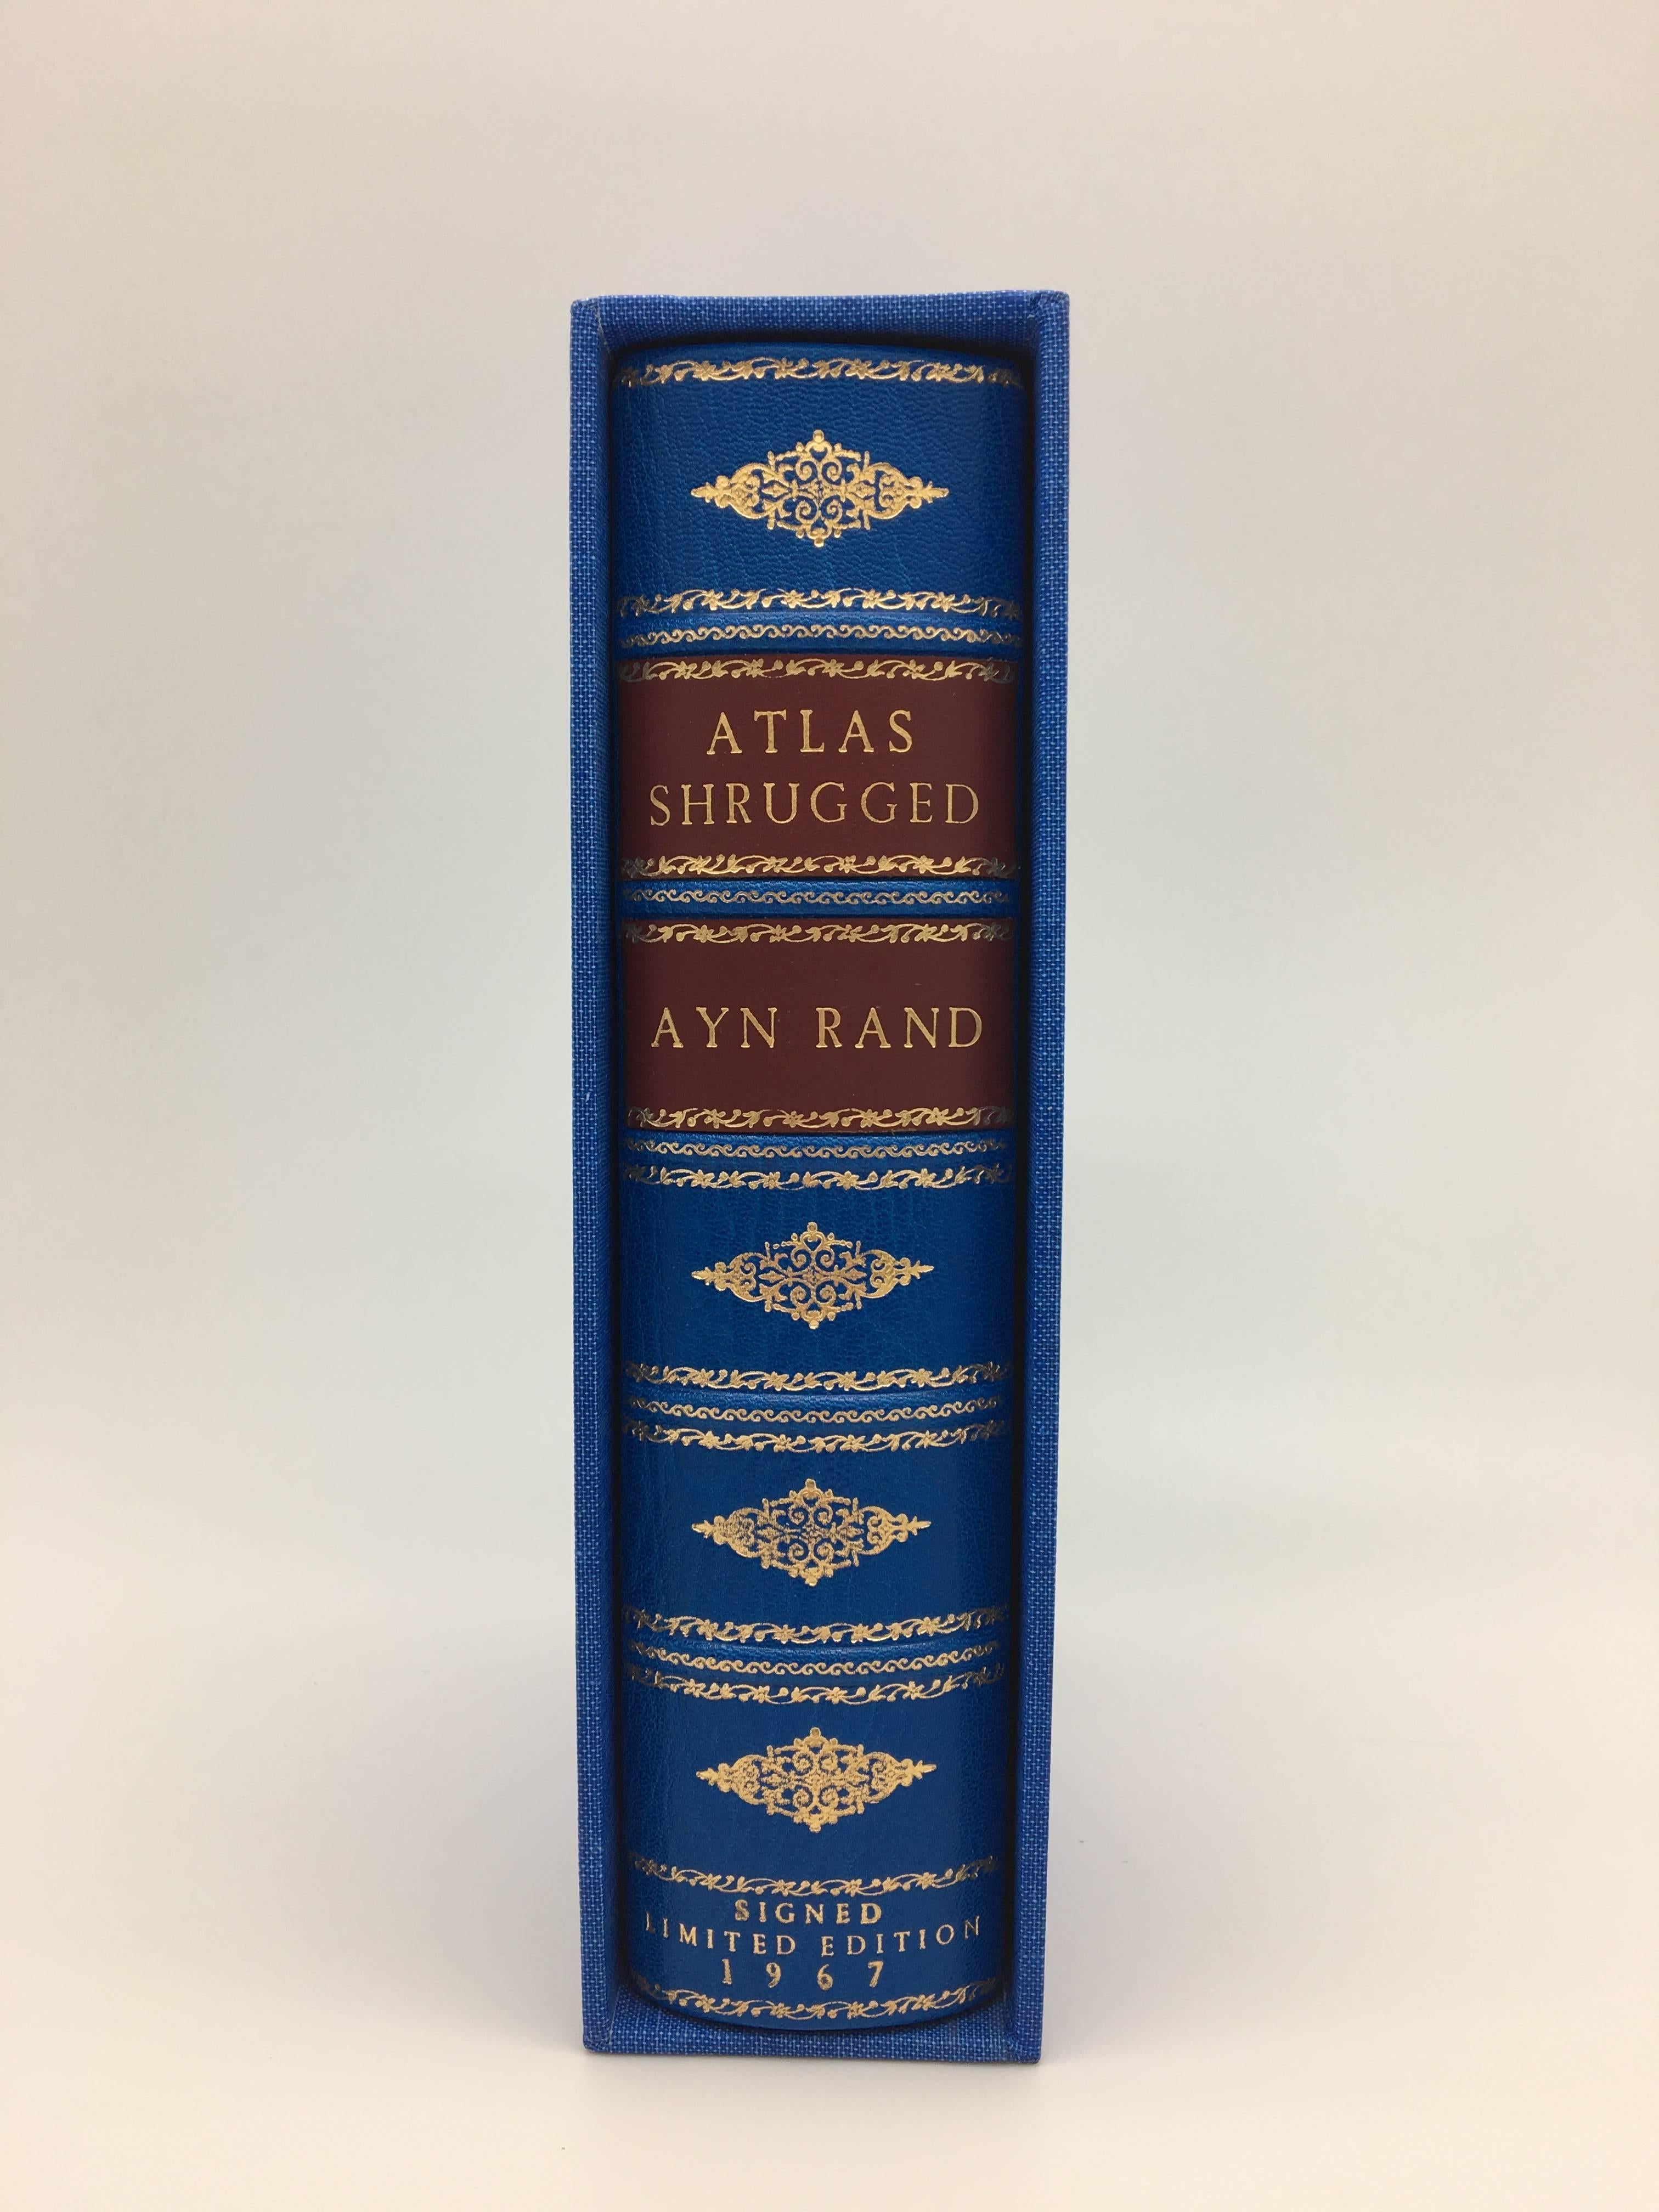 Rand, Ayn. Atlas Shrugged. New York: Random House, (1967). Octavo, bound in full leather with decorative gilt spine and marble endpapers -- signed by Ayn Rand on the limitation page.  Housed in a custom blue cloth slipcase with an image of the dust